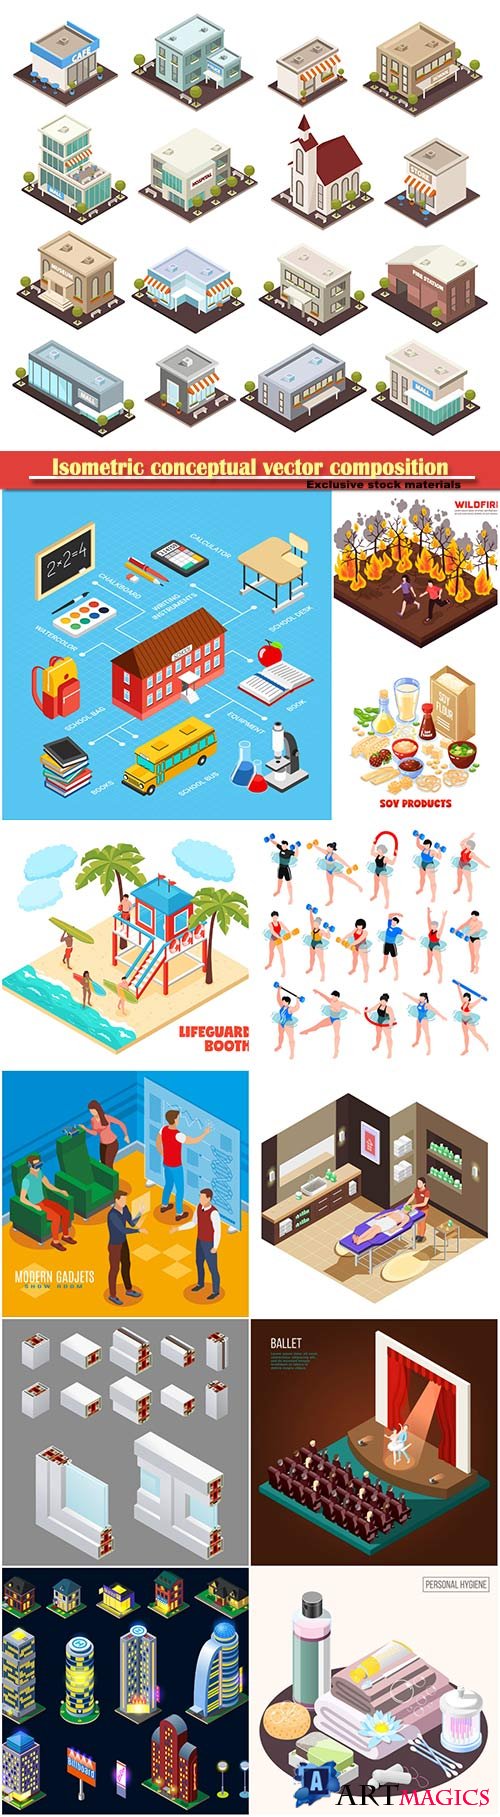 Isometric conceptual vector composition, infographics template # 22